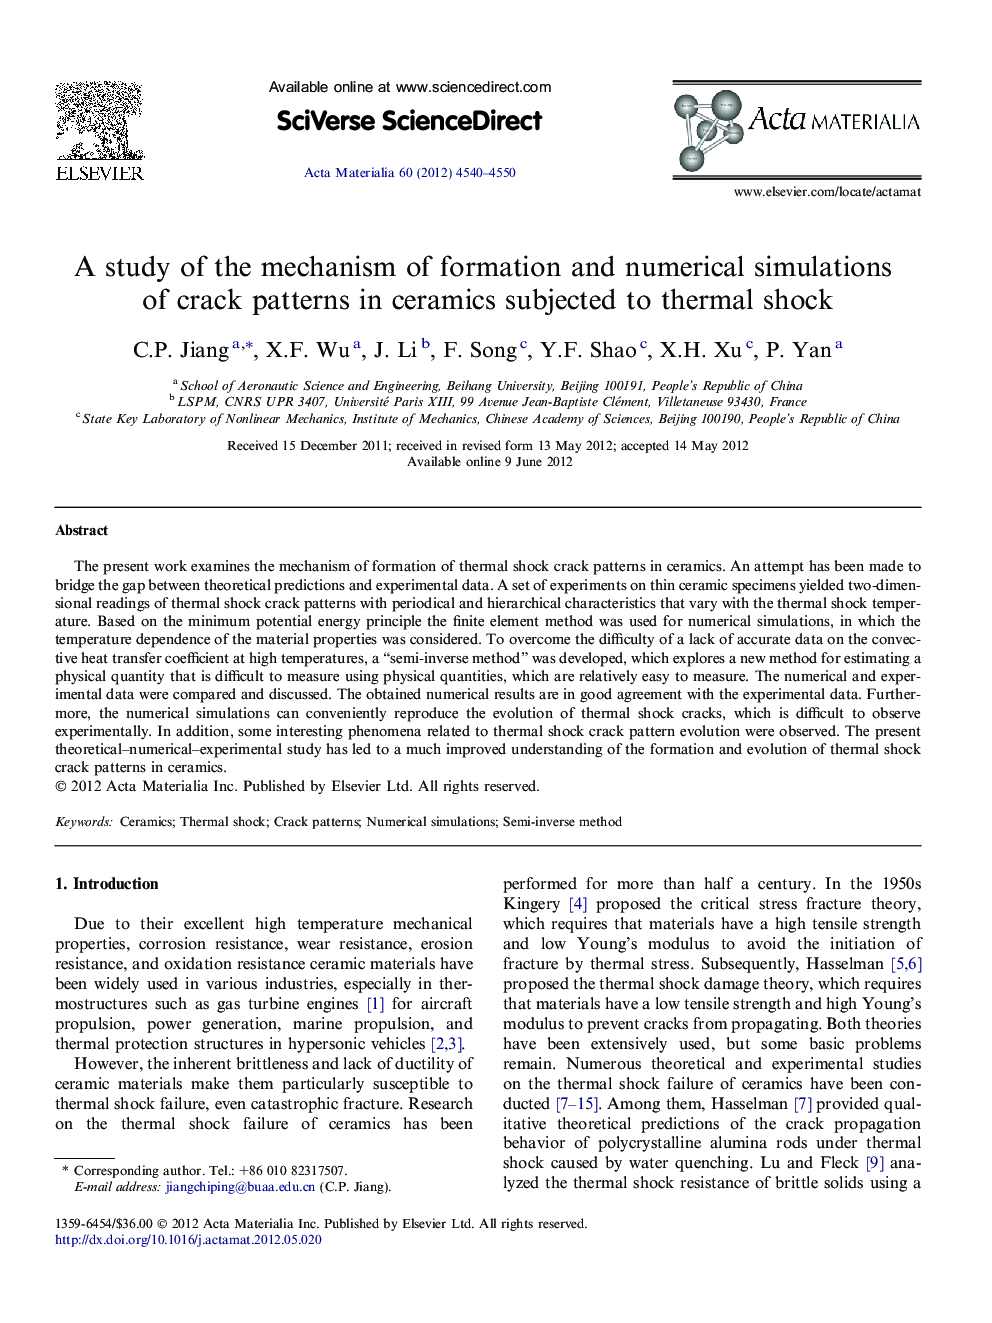 A study of the mechanism of formation and numerical simulations of crack patterns in ceramics subjected to thermal shock